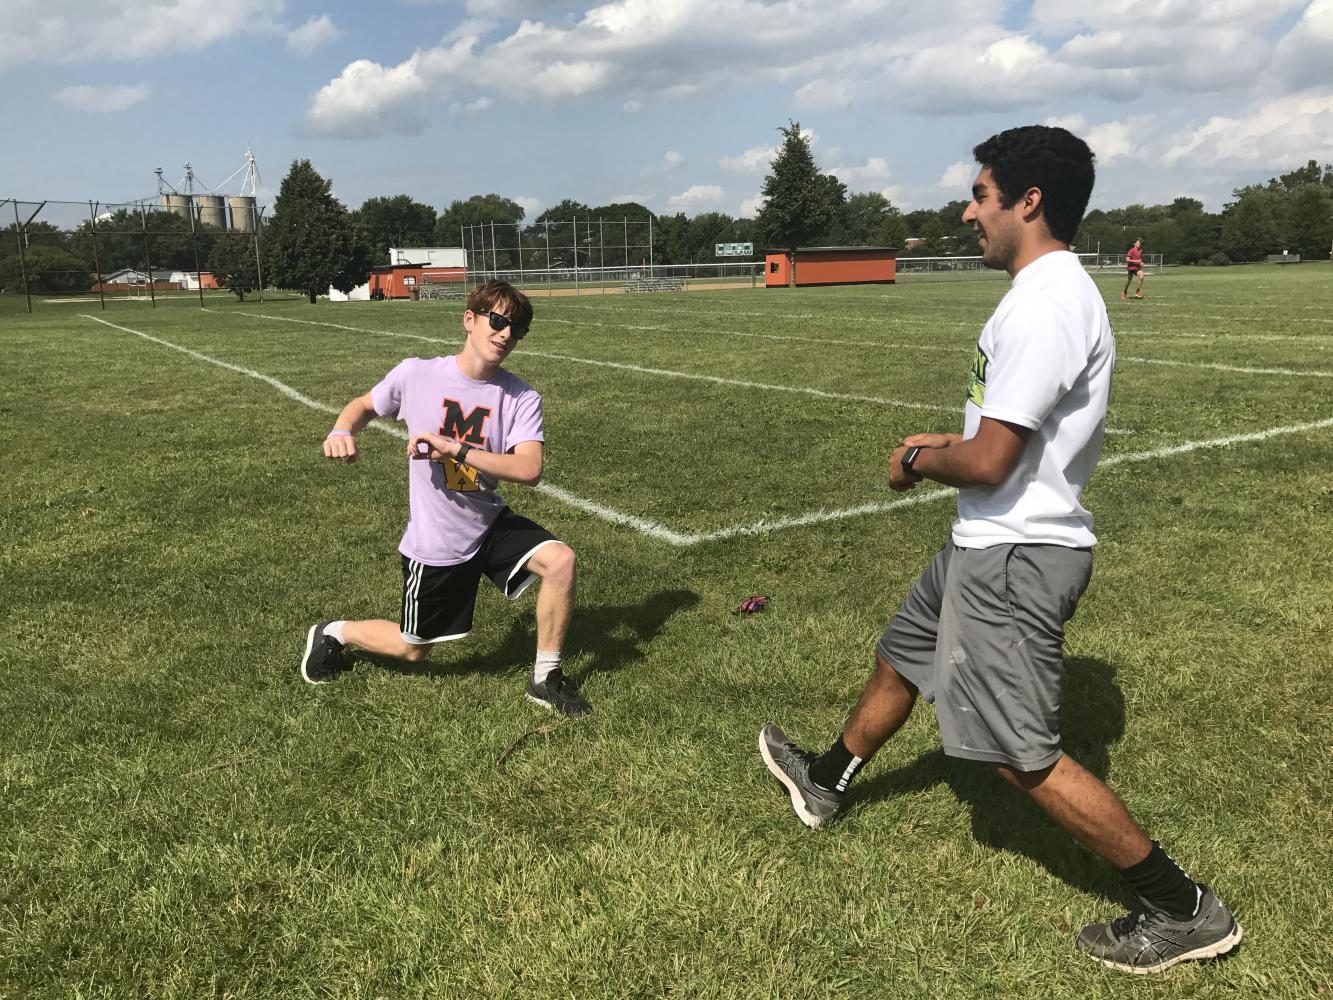 Seniors Mick Ward and Tony Cisneros perform the lunge matrix as part of their warmup before cross country practice on Aug. 24.